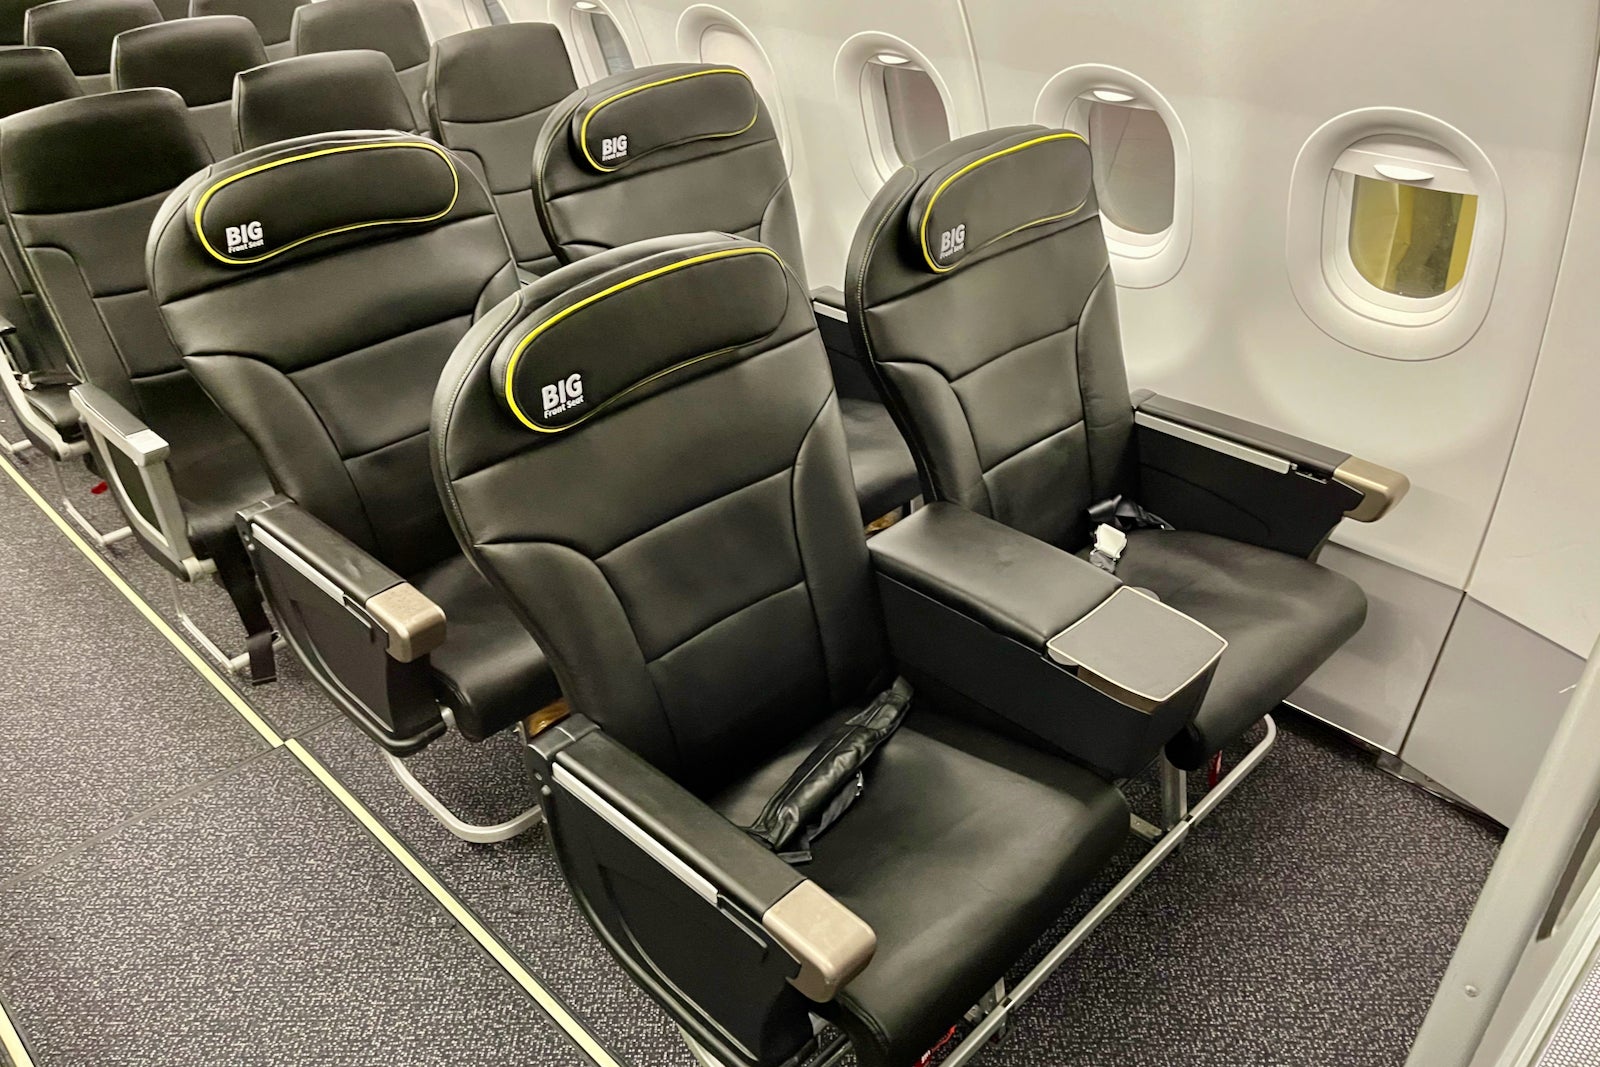 spirit airlines seat assignment cost